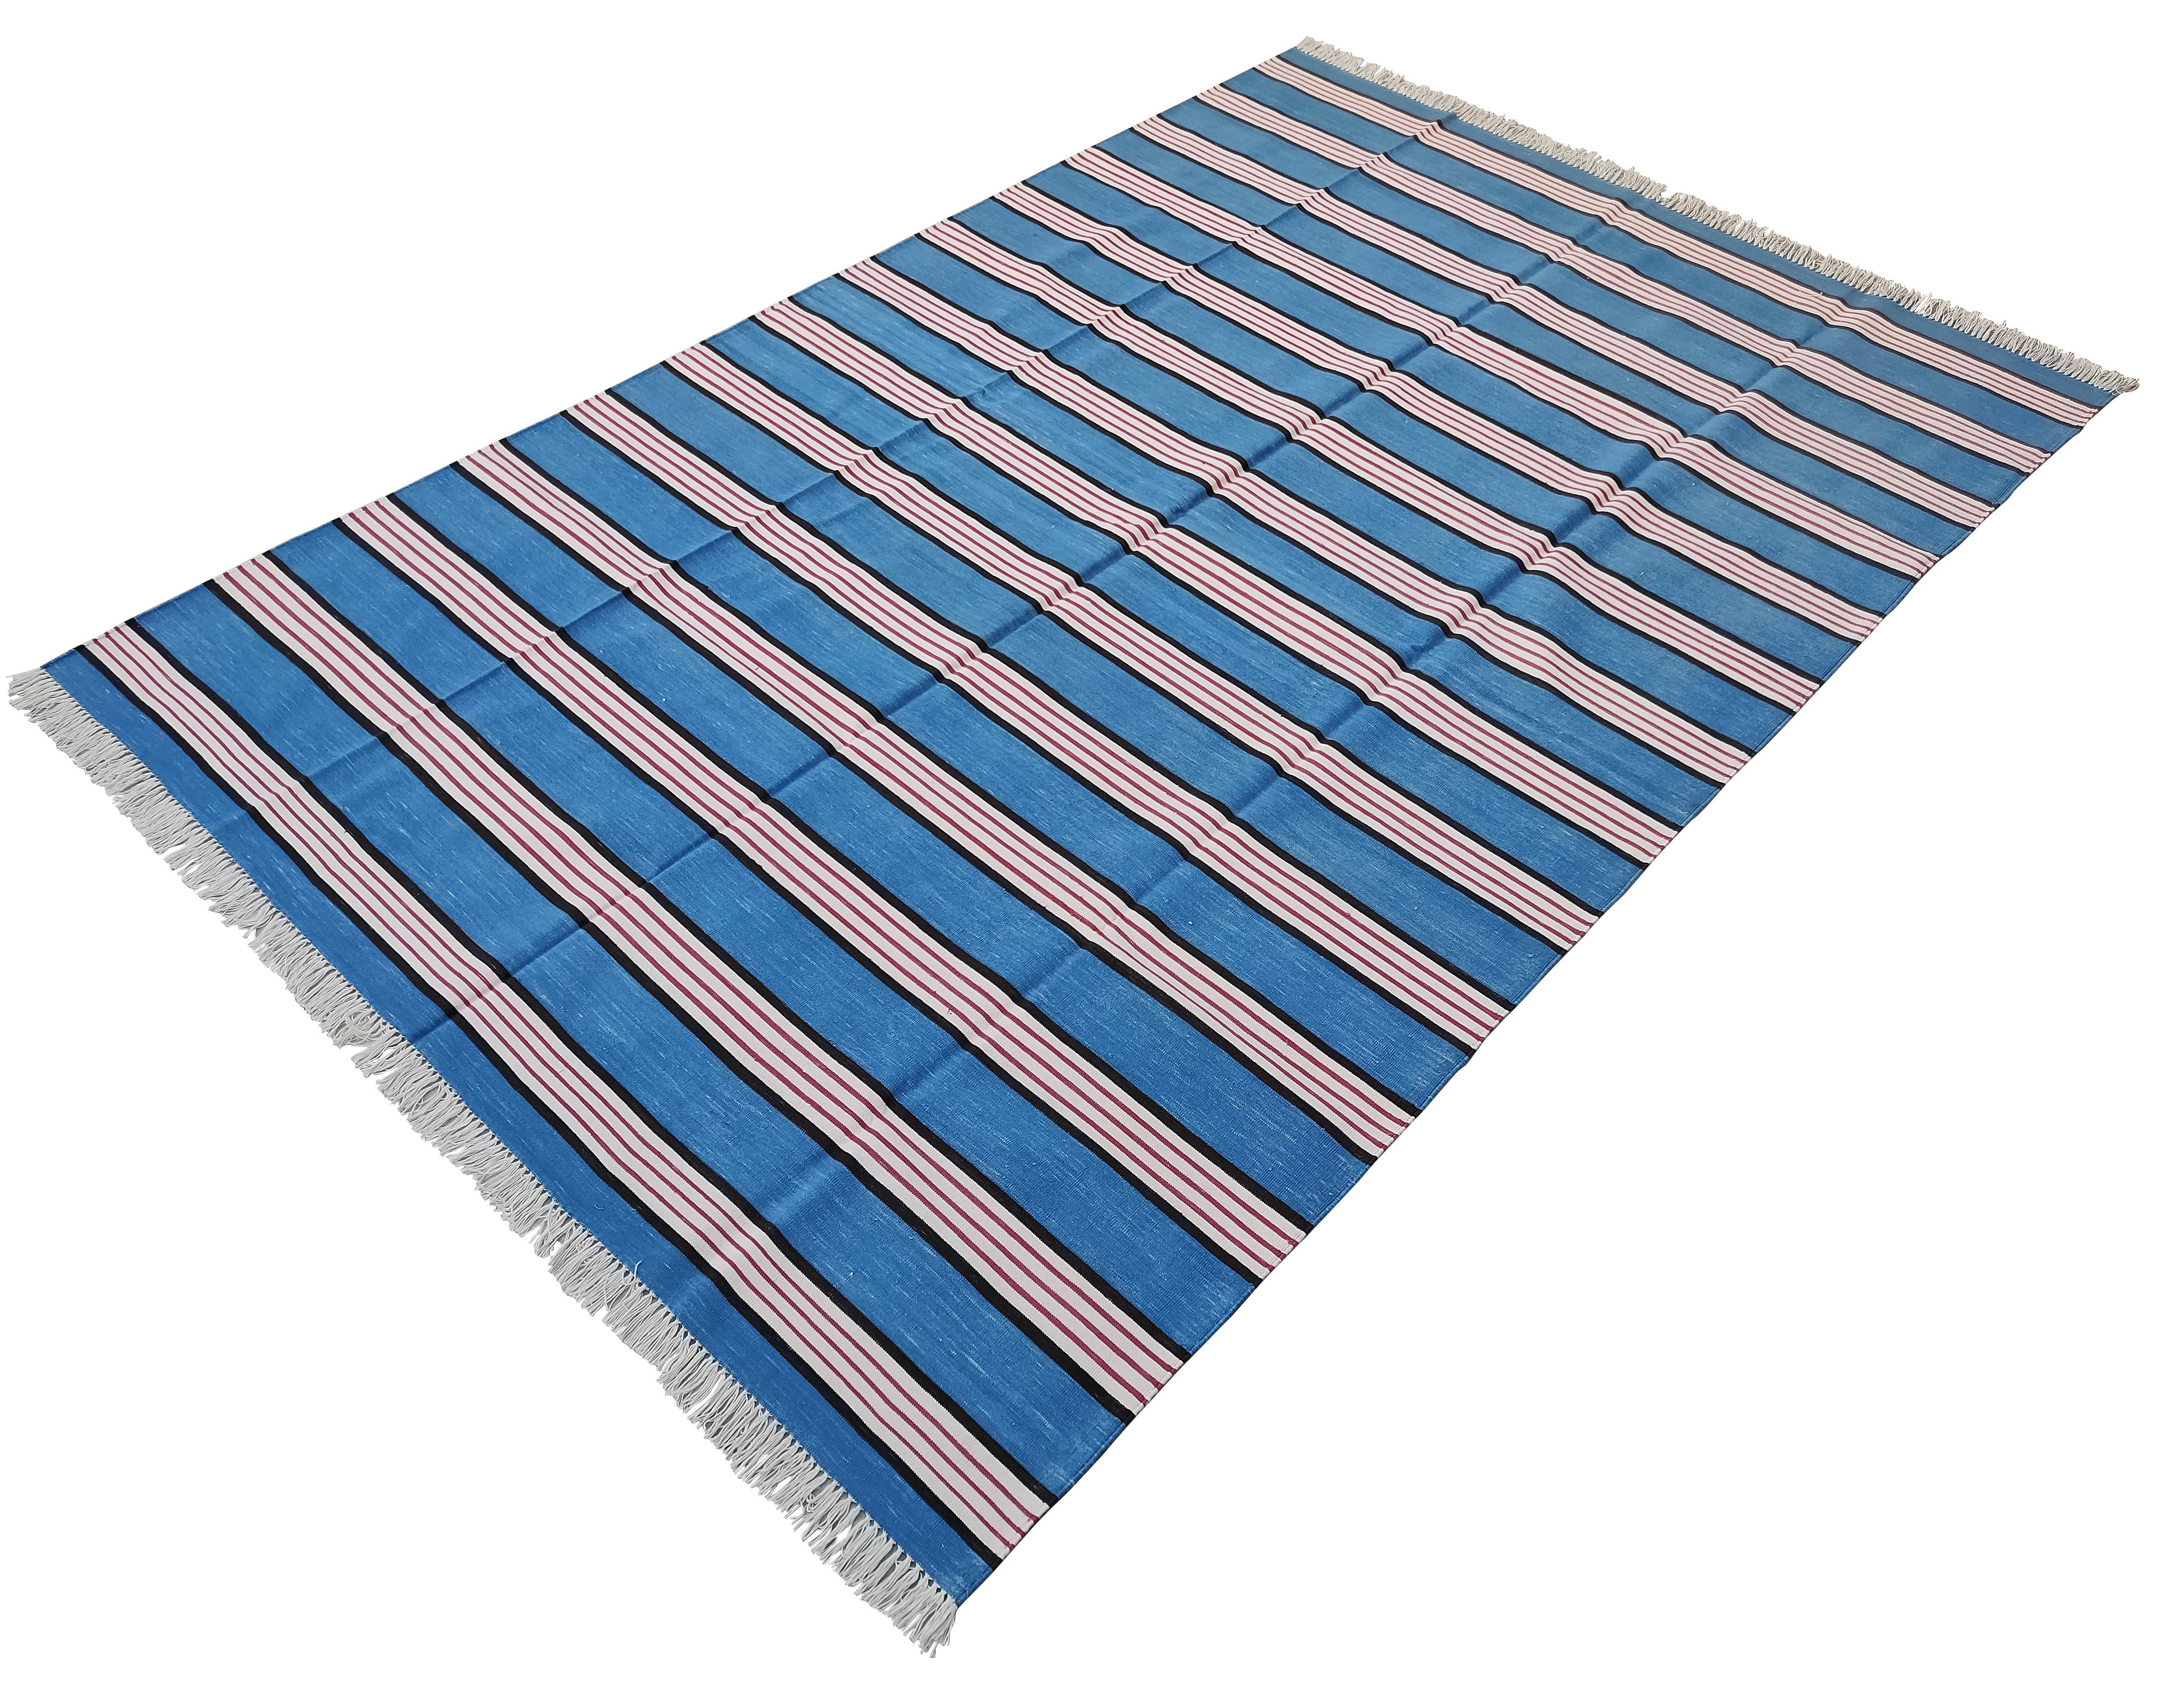 Handmade Cotton Area Flat Weave Rug, 6x9 Blue And Pink Striped Indian Dhurrie For Sale 1